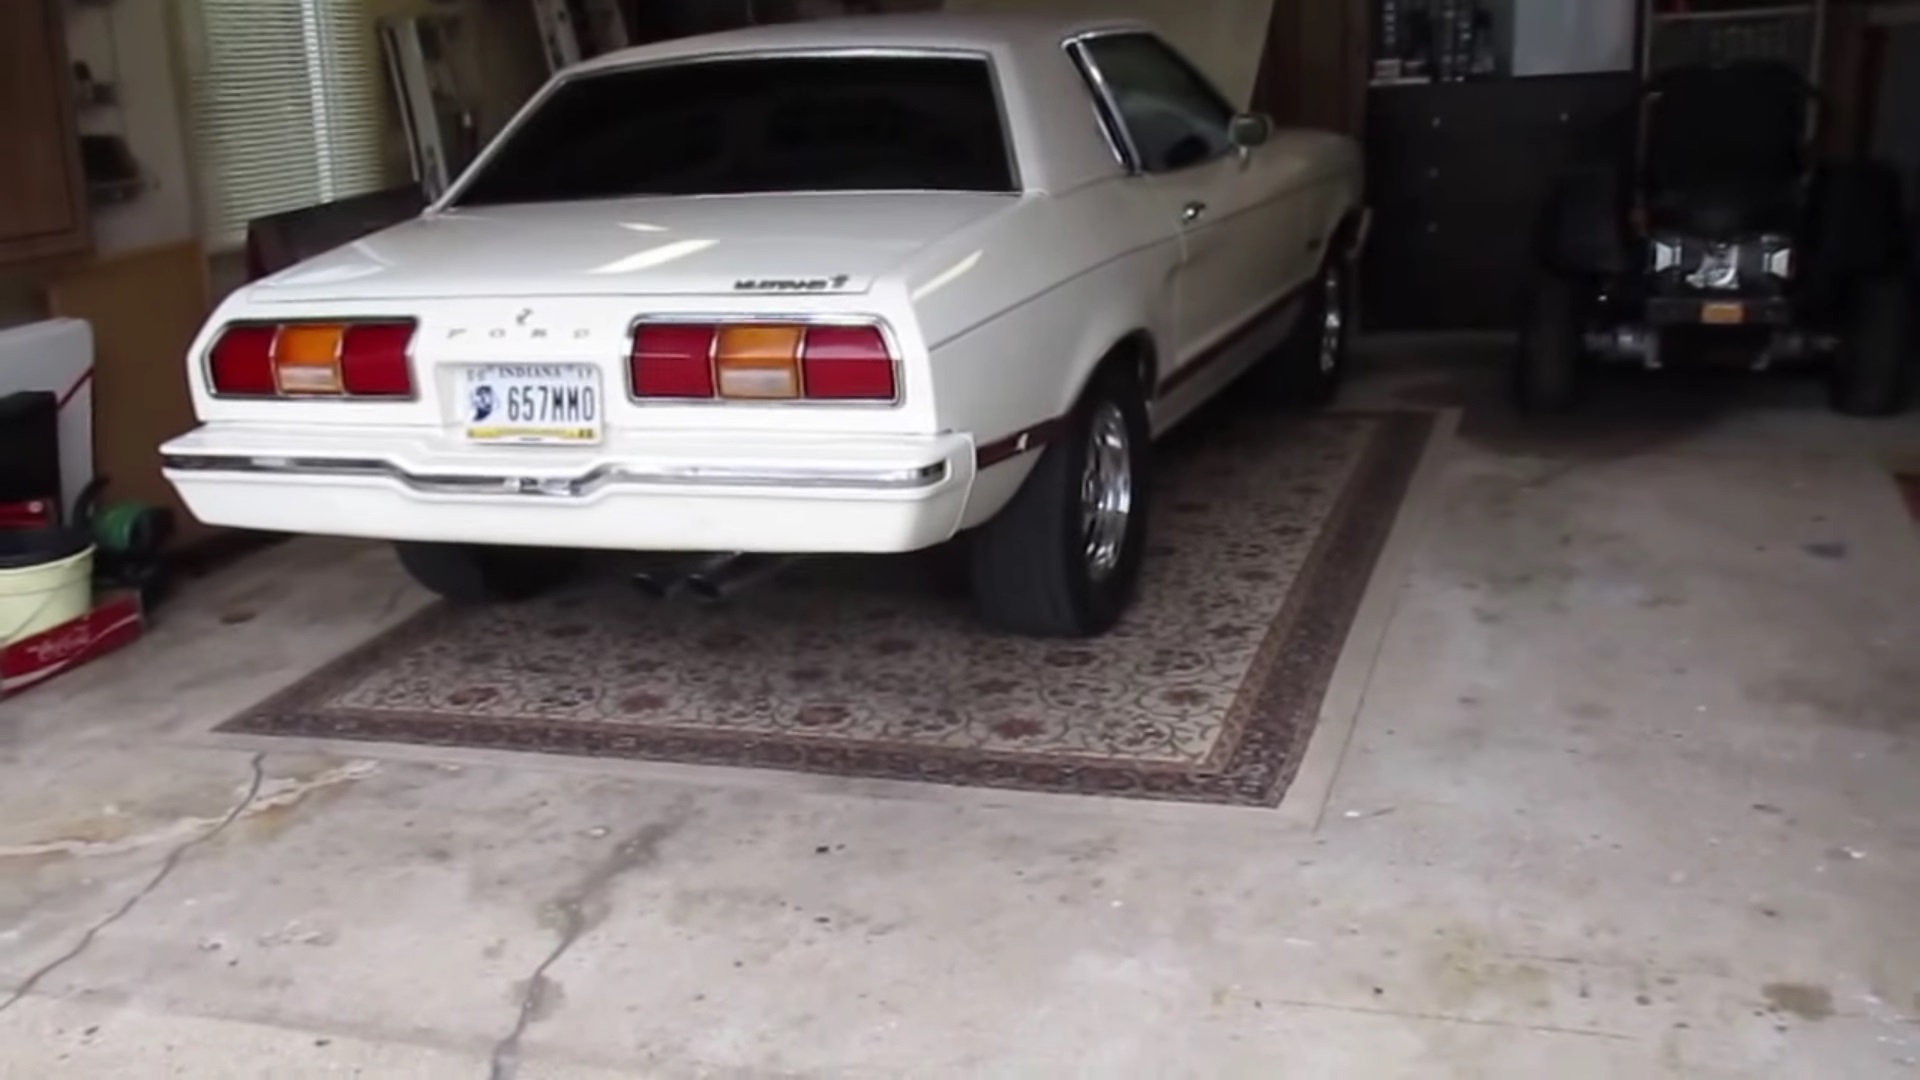 Video: 1975 Ford Mustang Ghia Quick Tour + Startup